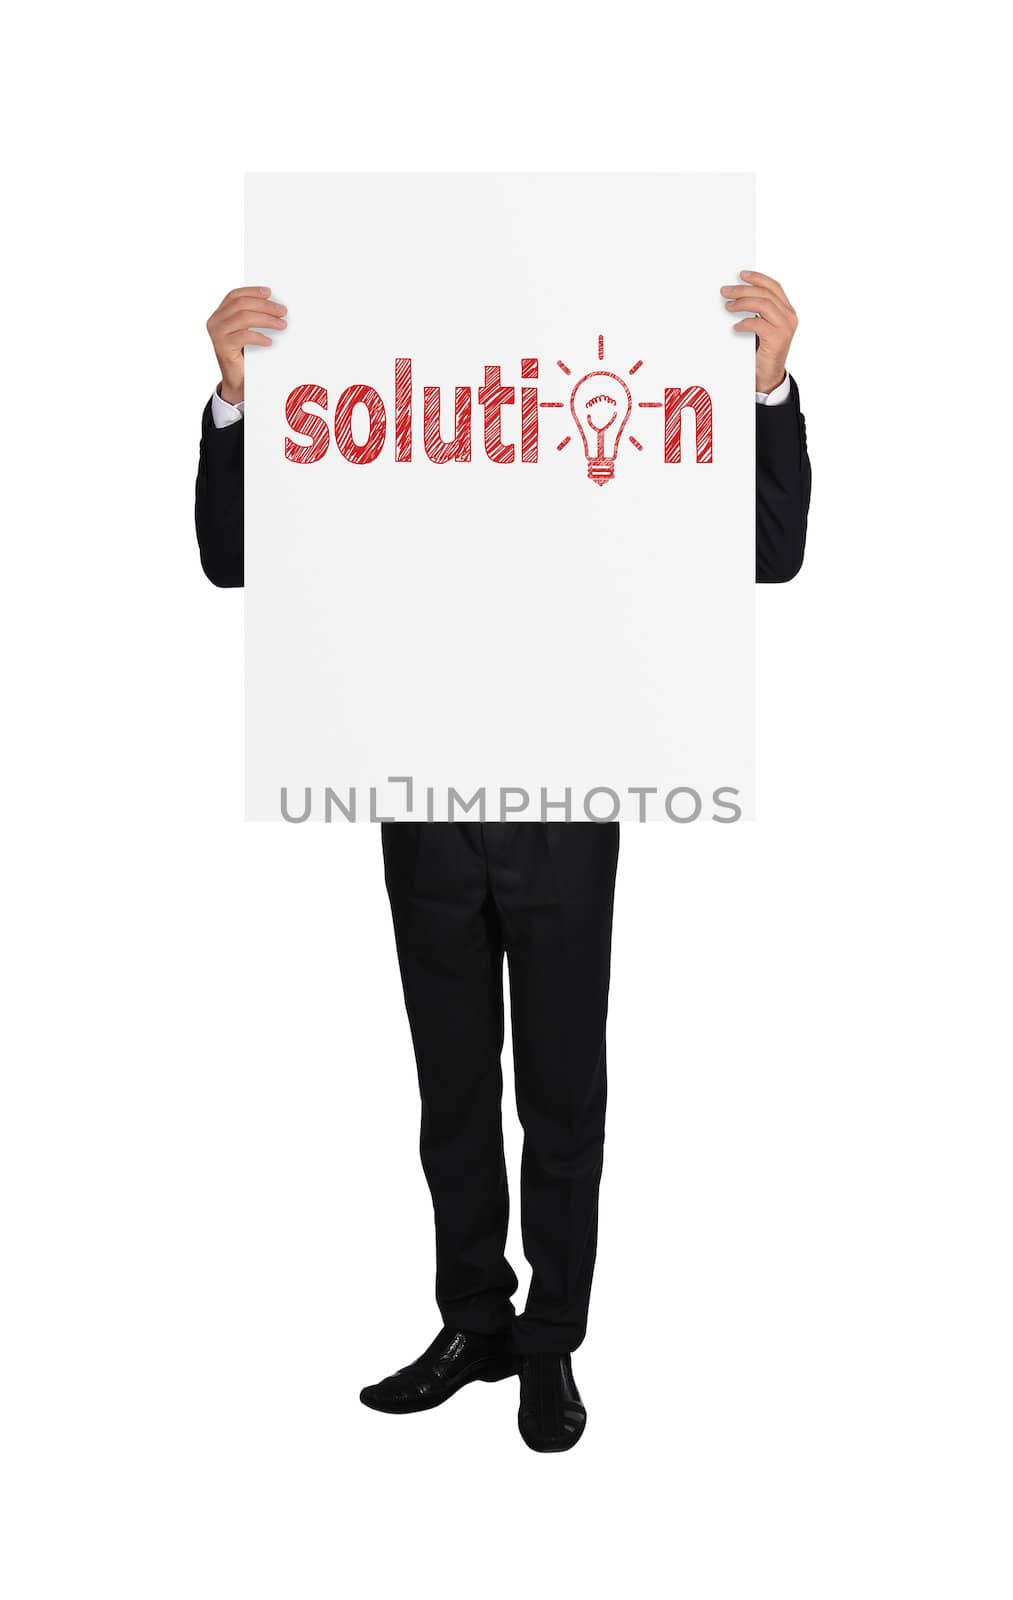 placard with solution by vetkit